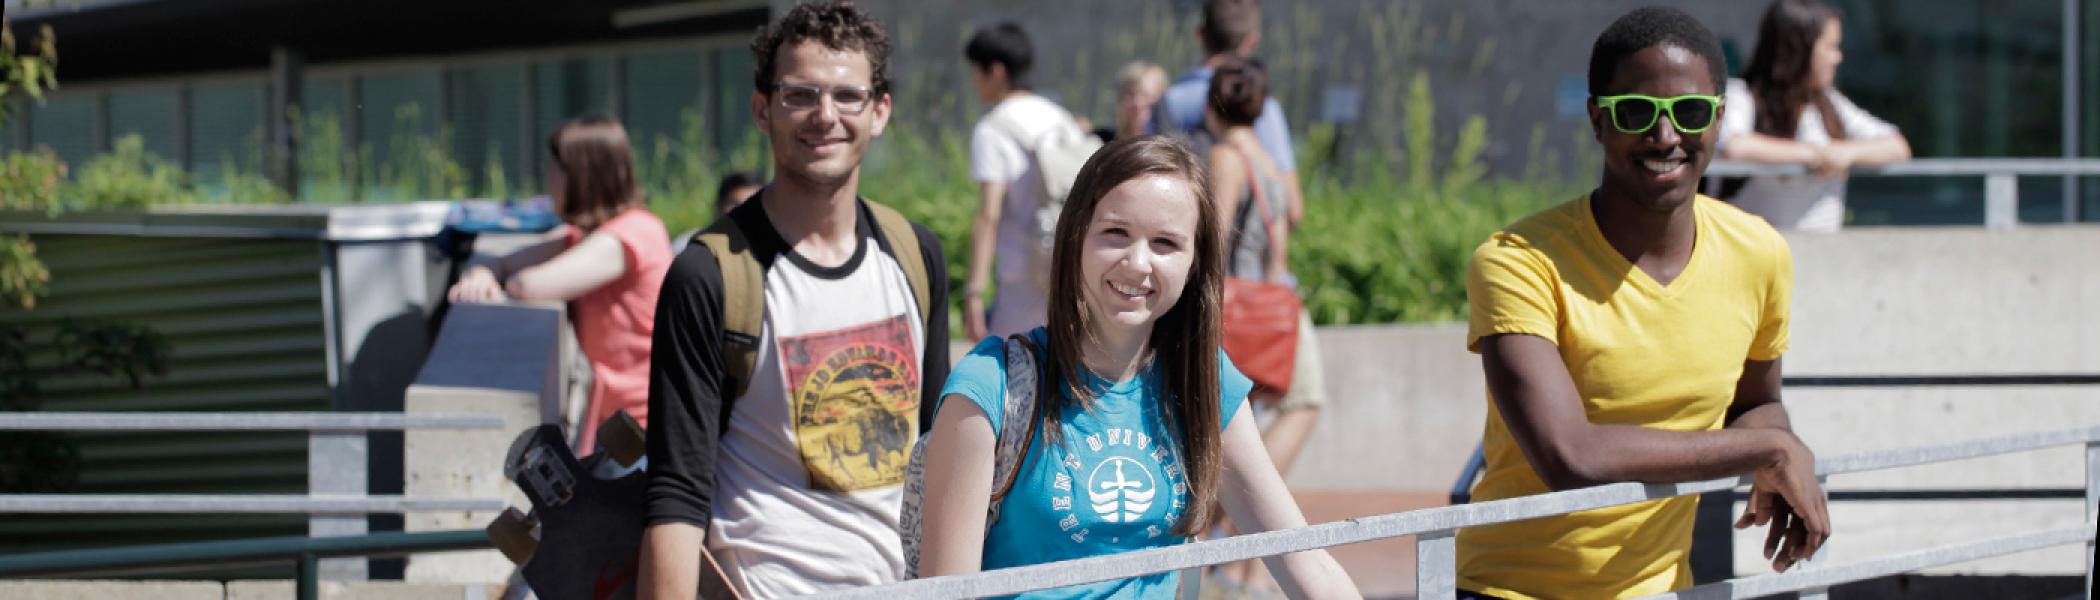 Students standing at the railing of faryon bridge near gzowski college in the early afternnon